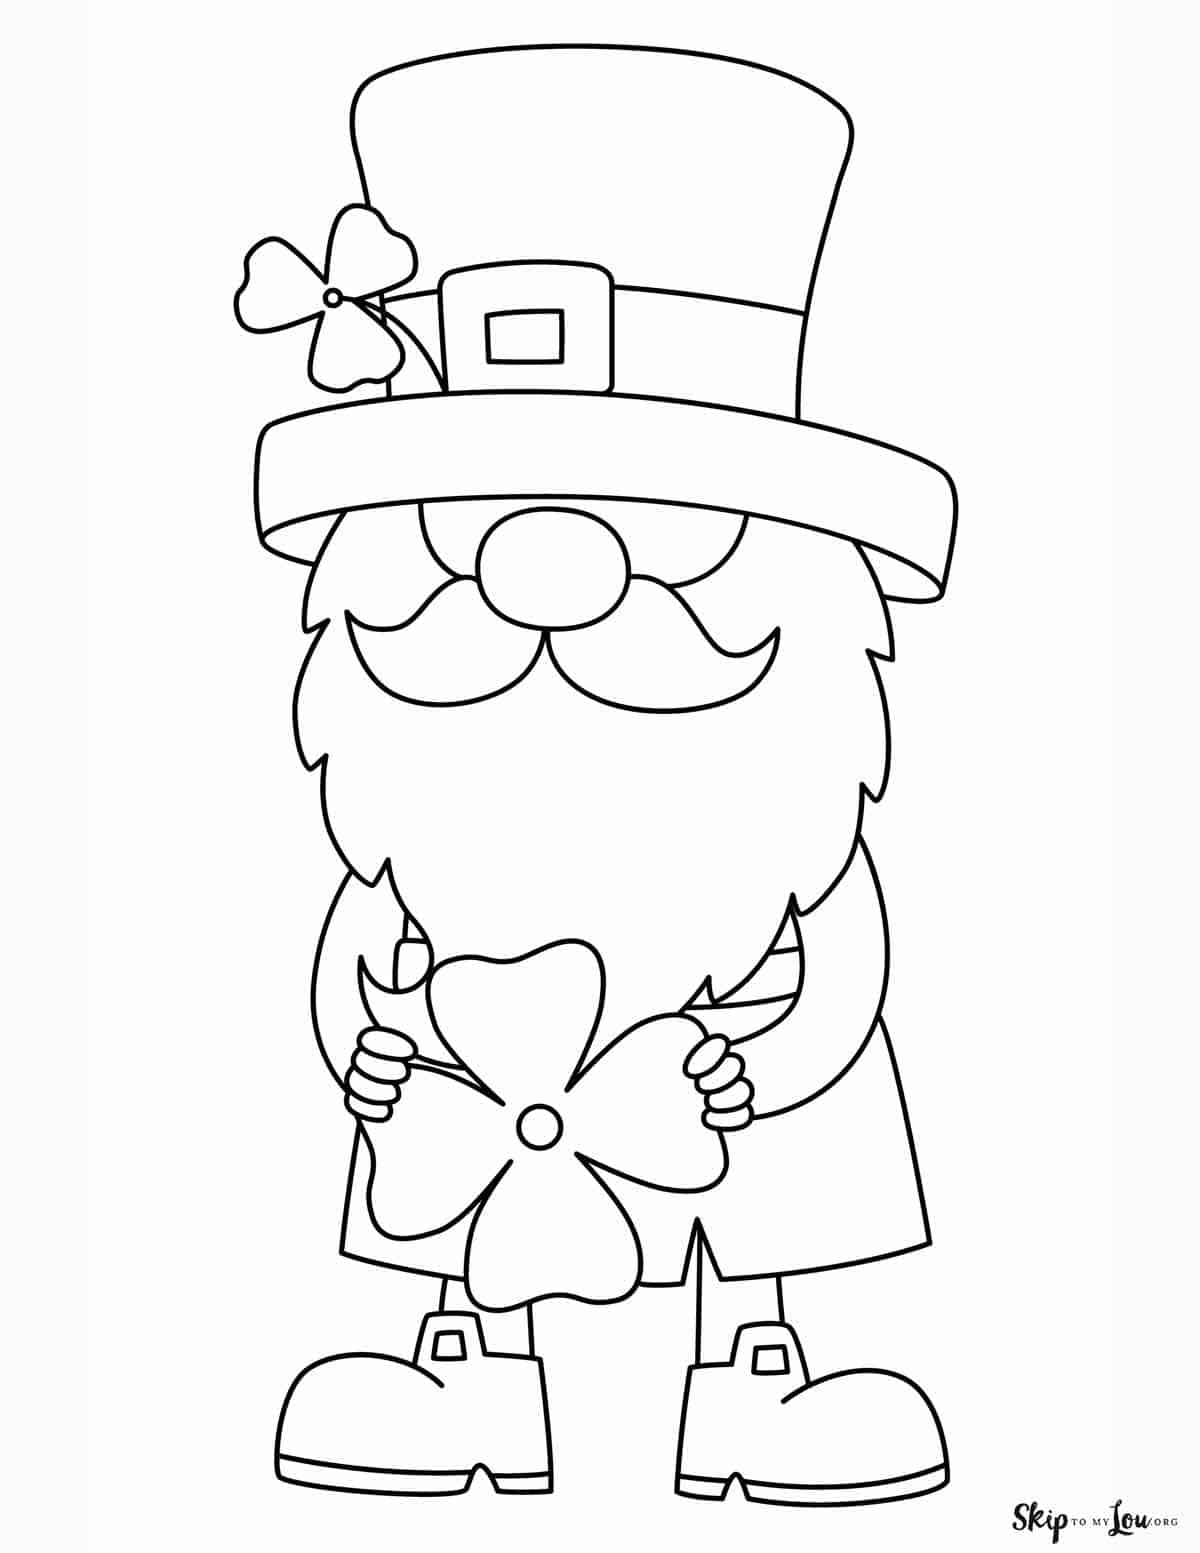 leprechaun coloring page gnome holding four leaf clover